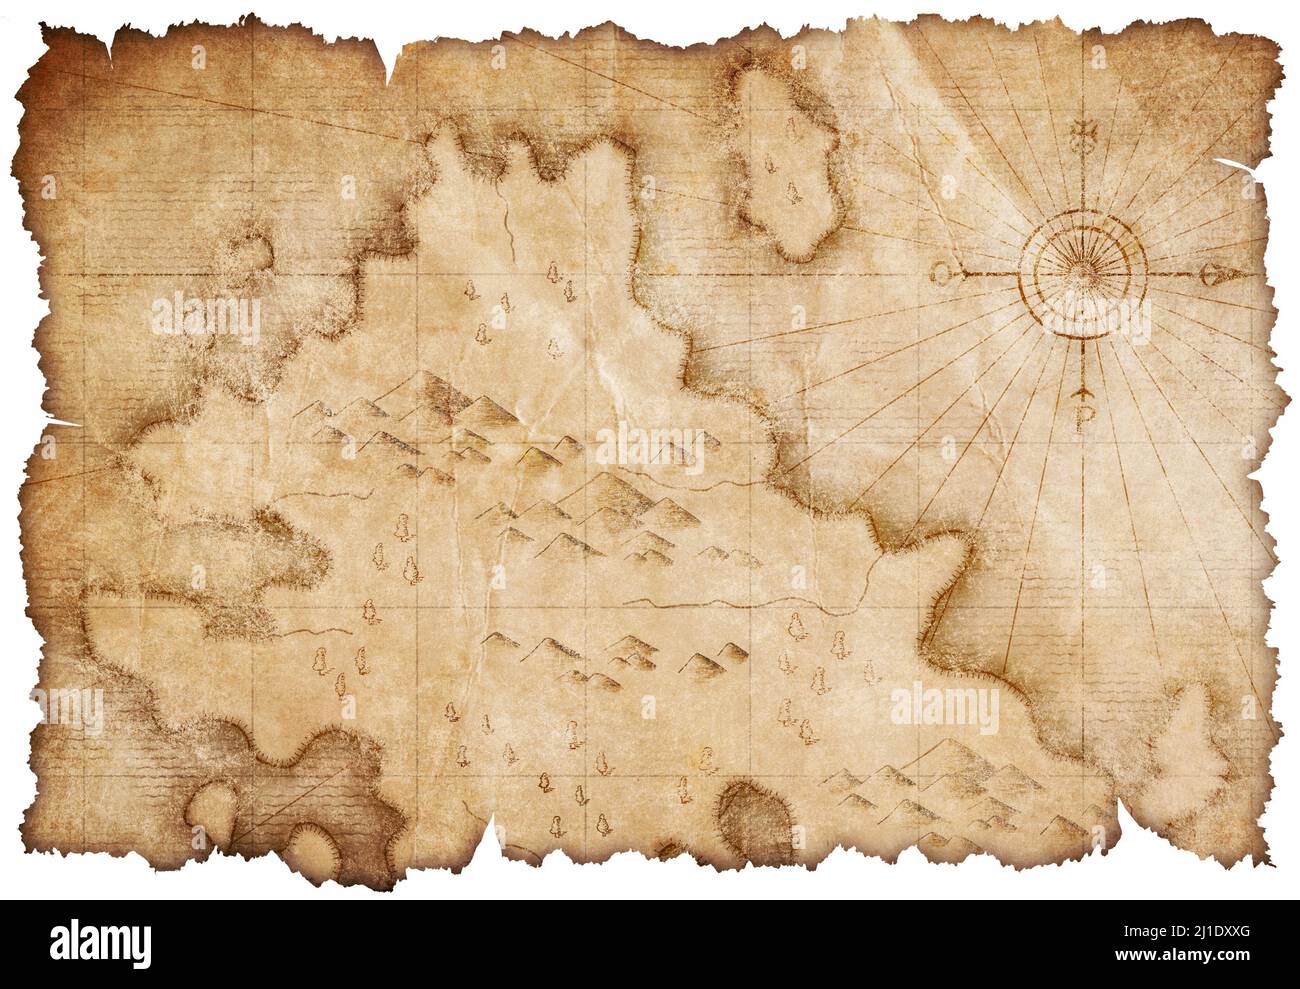 medieval pirates map with hidden treasures isolated Stock Photo